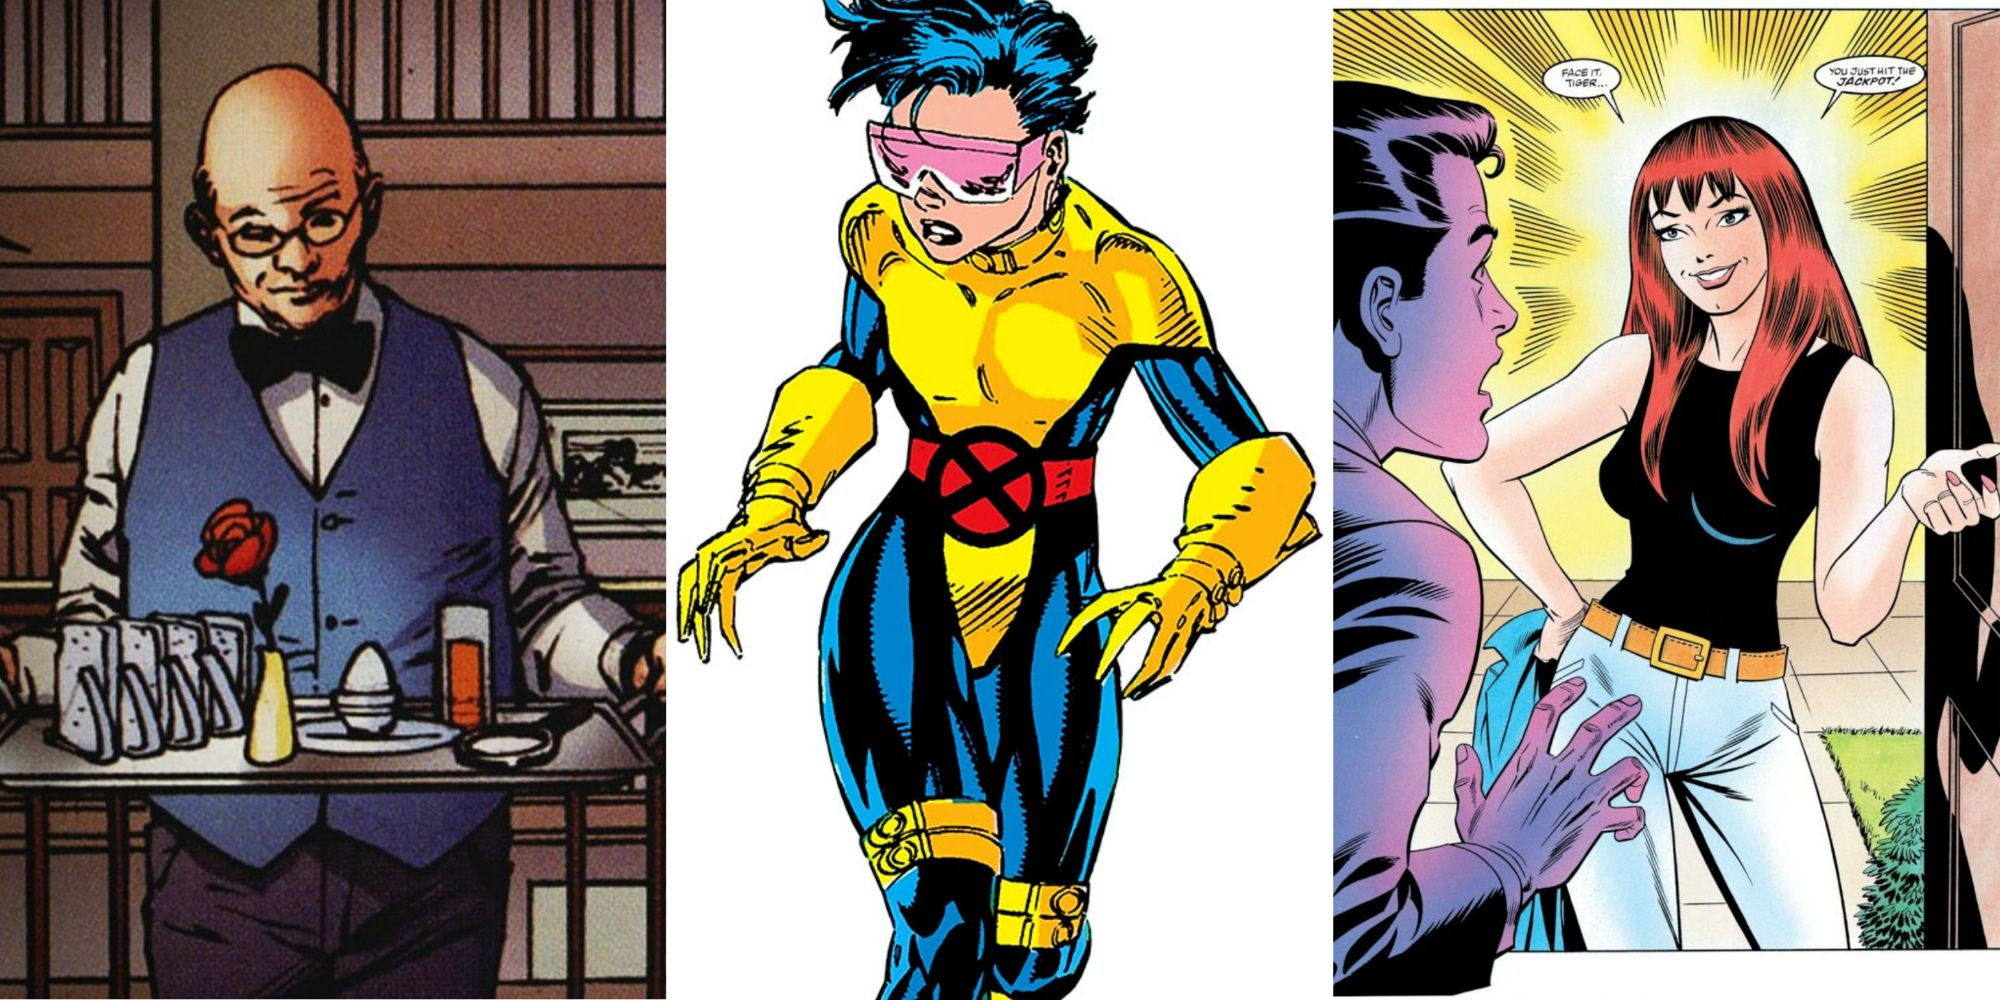 A split image of Jarvis, Jubilee, and MJ Watson in Marvel Comics